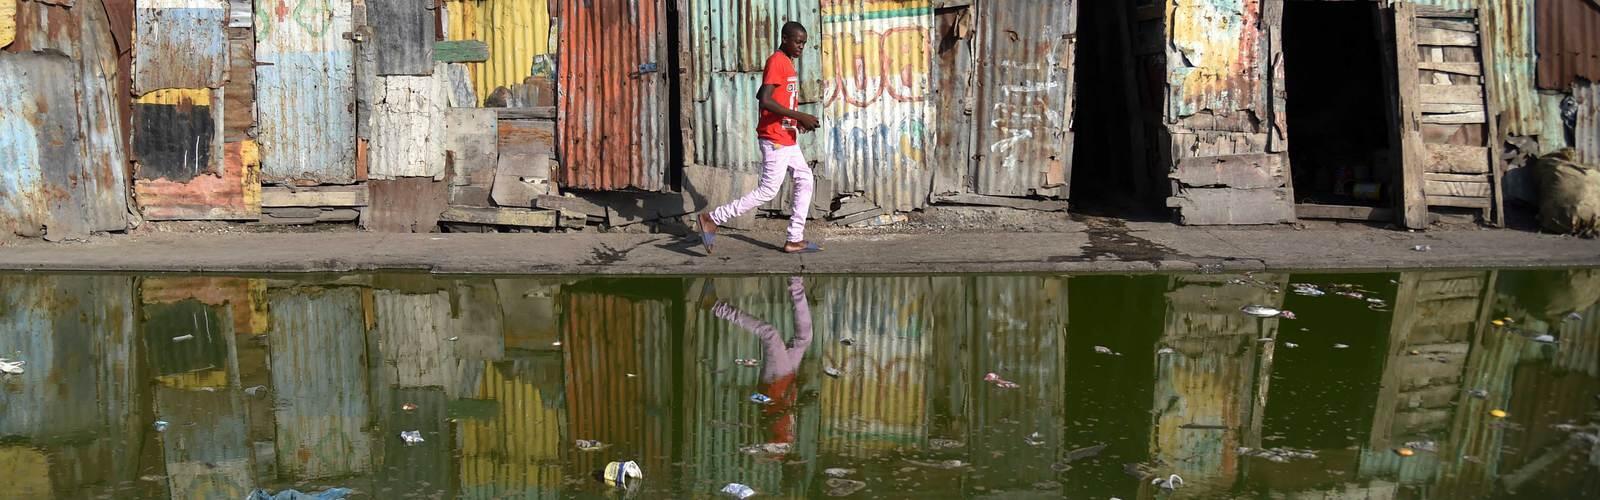 Hunger and Hope in Haiti:  Amy Wilentz, plus Mia Birdsong on poverty and Kate Aronoff and Michael Kazin on socialism